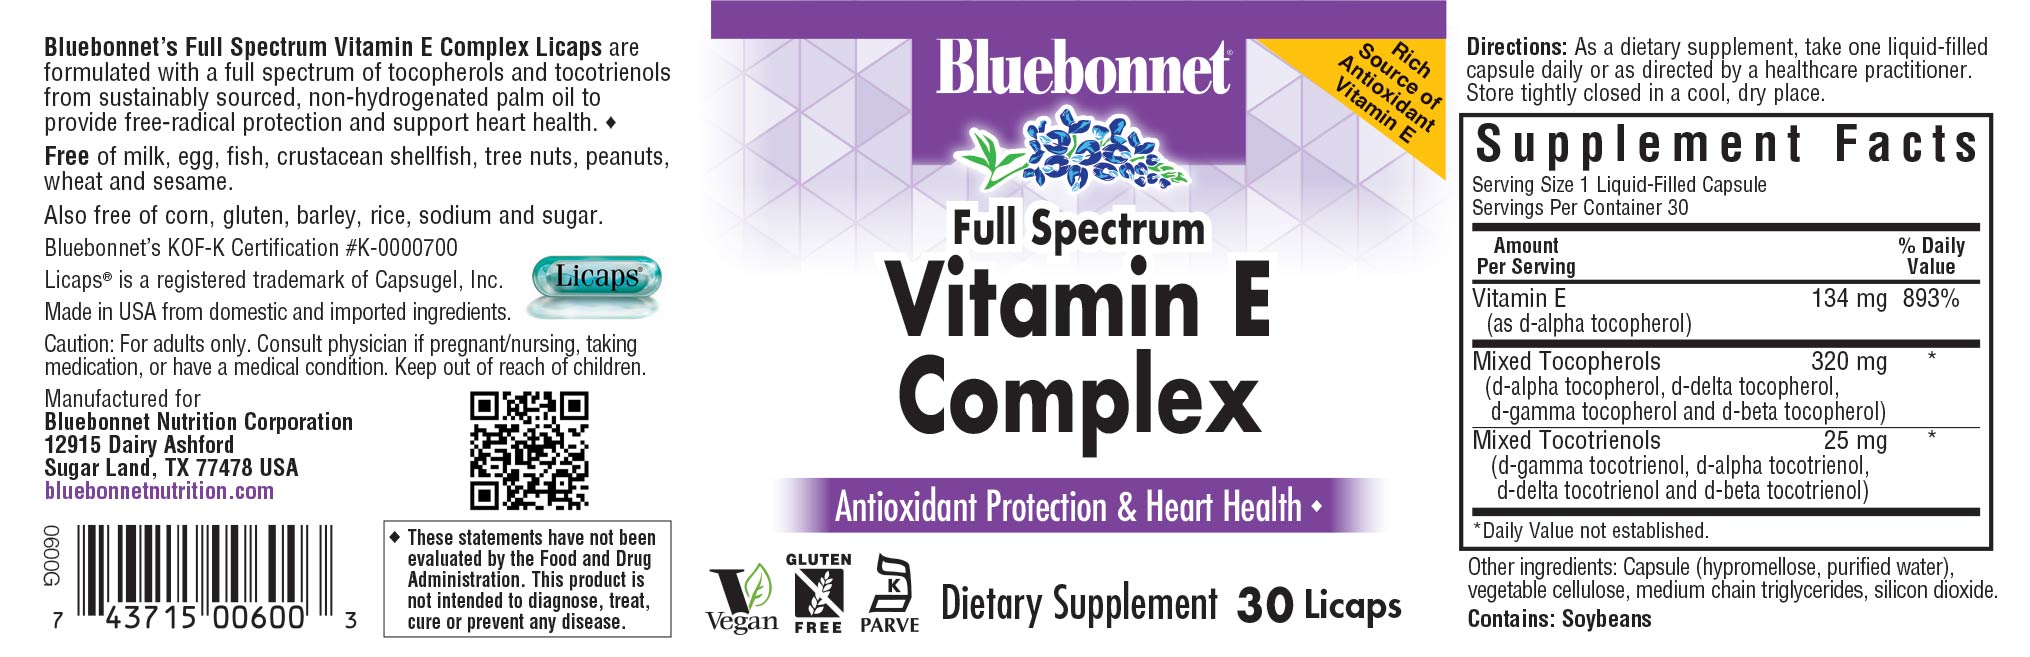 Bluebonnet’s Full Spectrum Vitamin E Complex Licaps are specially formulated with d-alpha tocopherol and full spectrum tocopherol isomers (alpha, beta, delta and gamma) and tocotrienol isomers (alpha, beta, delta and gamma) from sustainably sourced, non-hydrogenated palm oil from Malaysia, which enforces strict environmental regulations. Research has found that a total vitamin E complex are formulated withing all family members may provide more health benefits than just d-alpha tocopherol alone